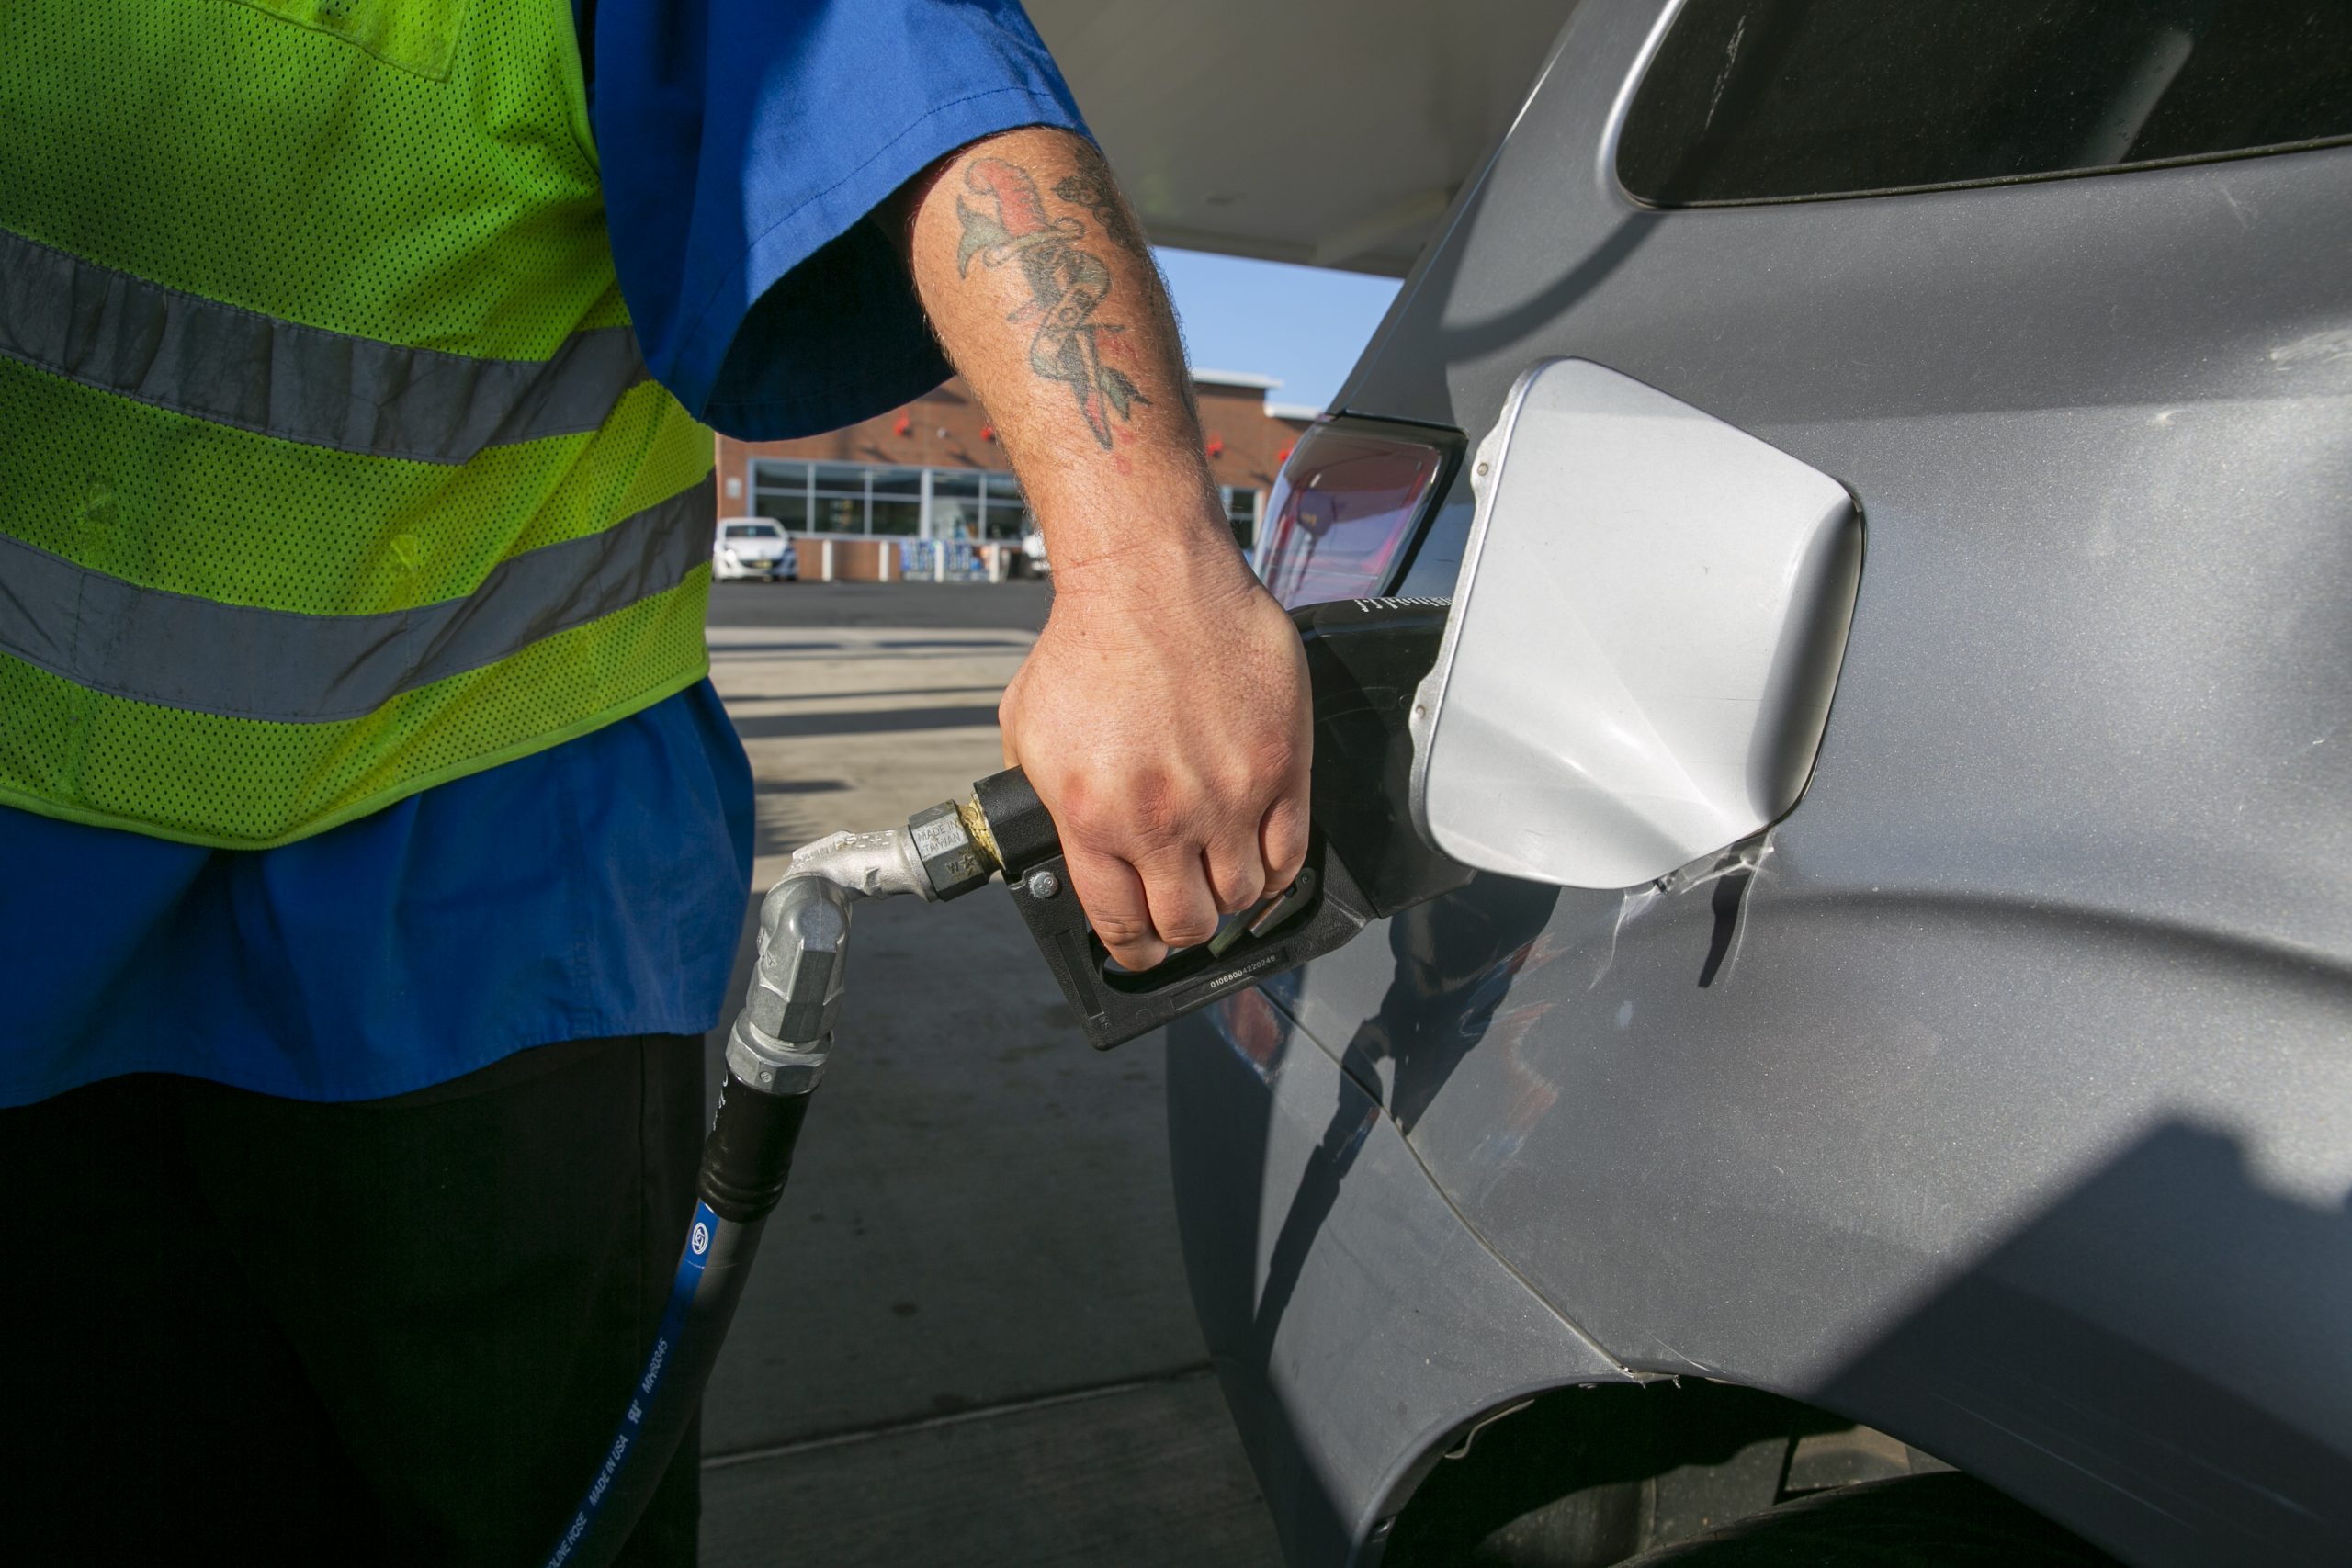 Gas prices are falling. Is it too late to save the Dems?